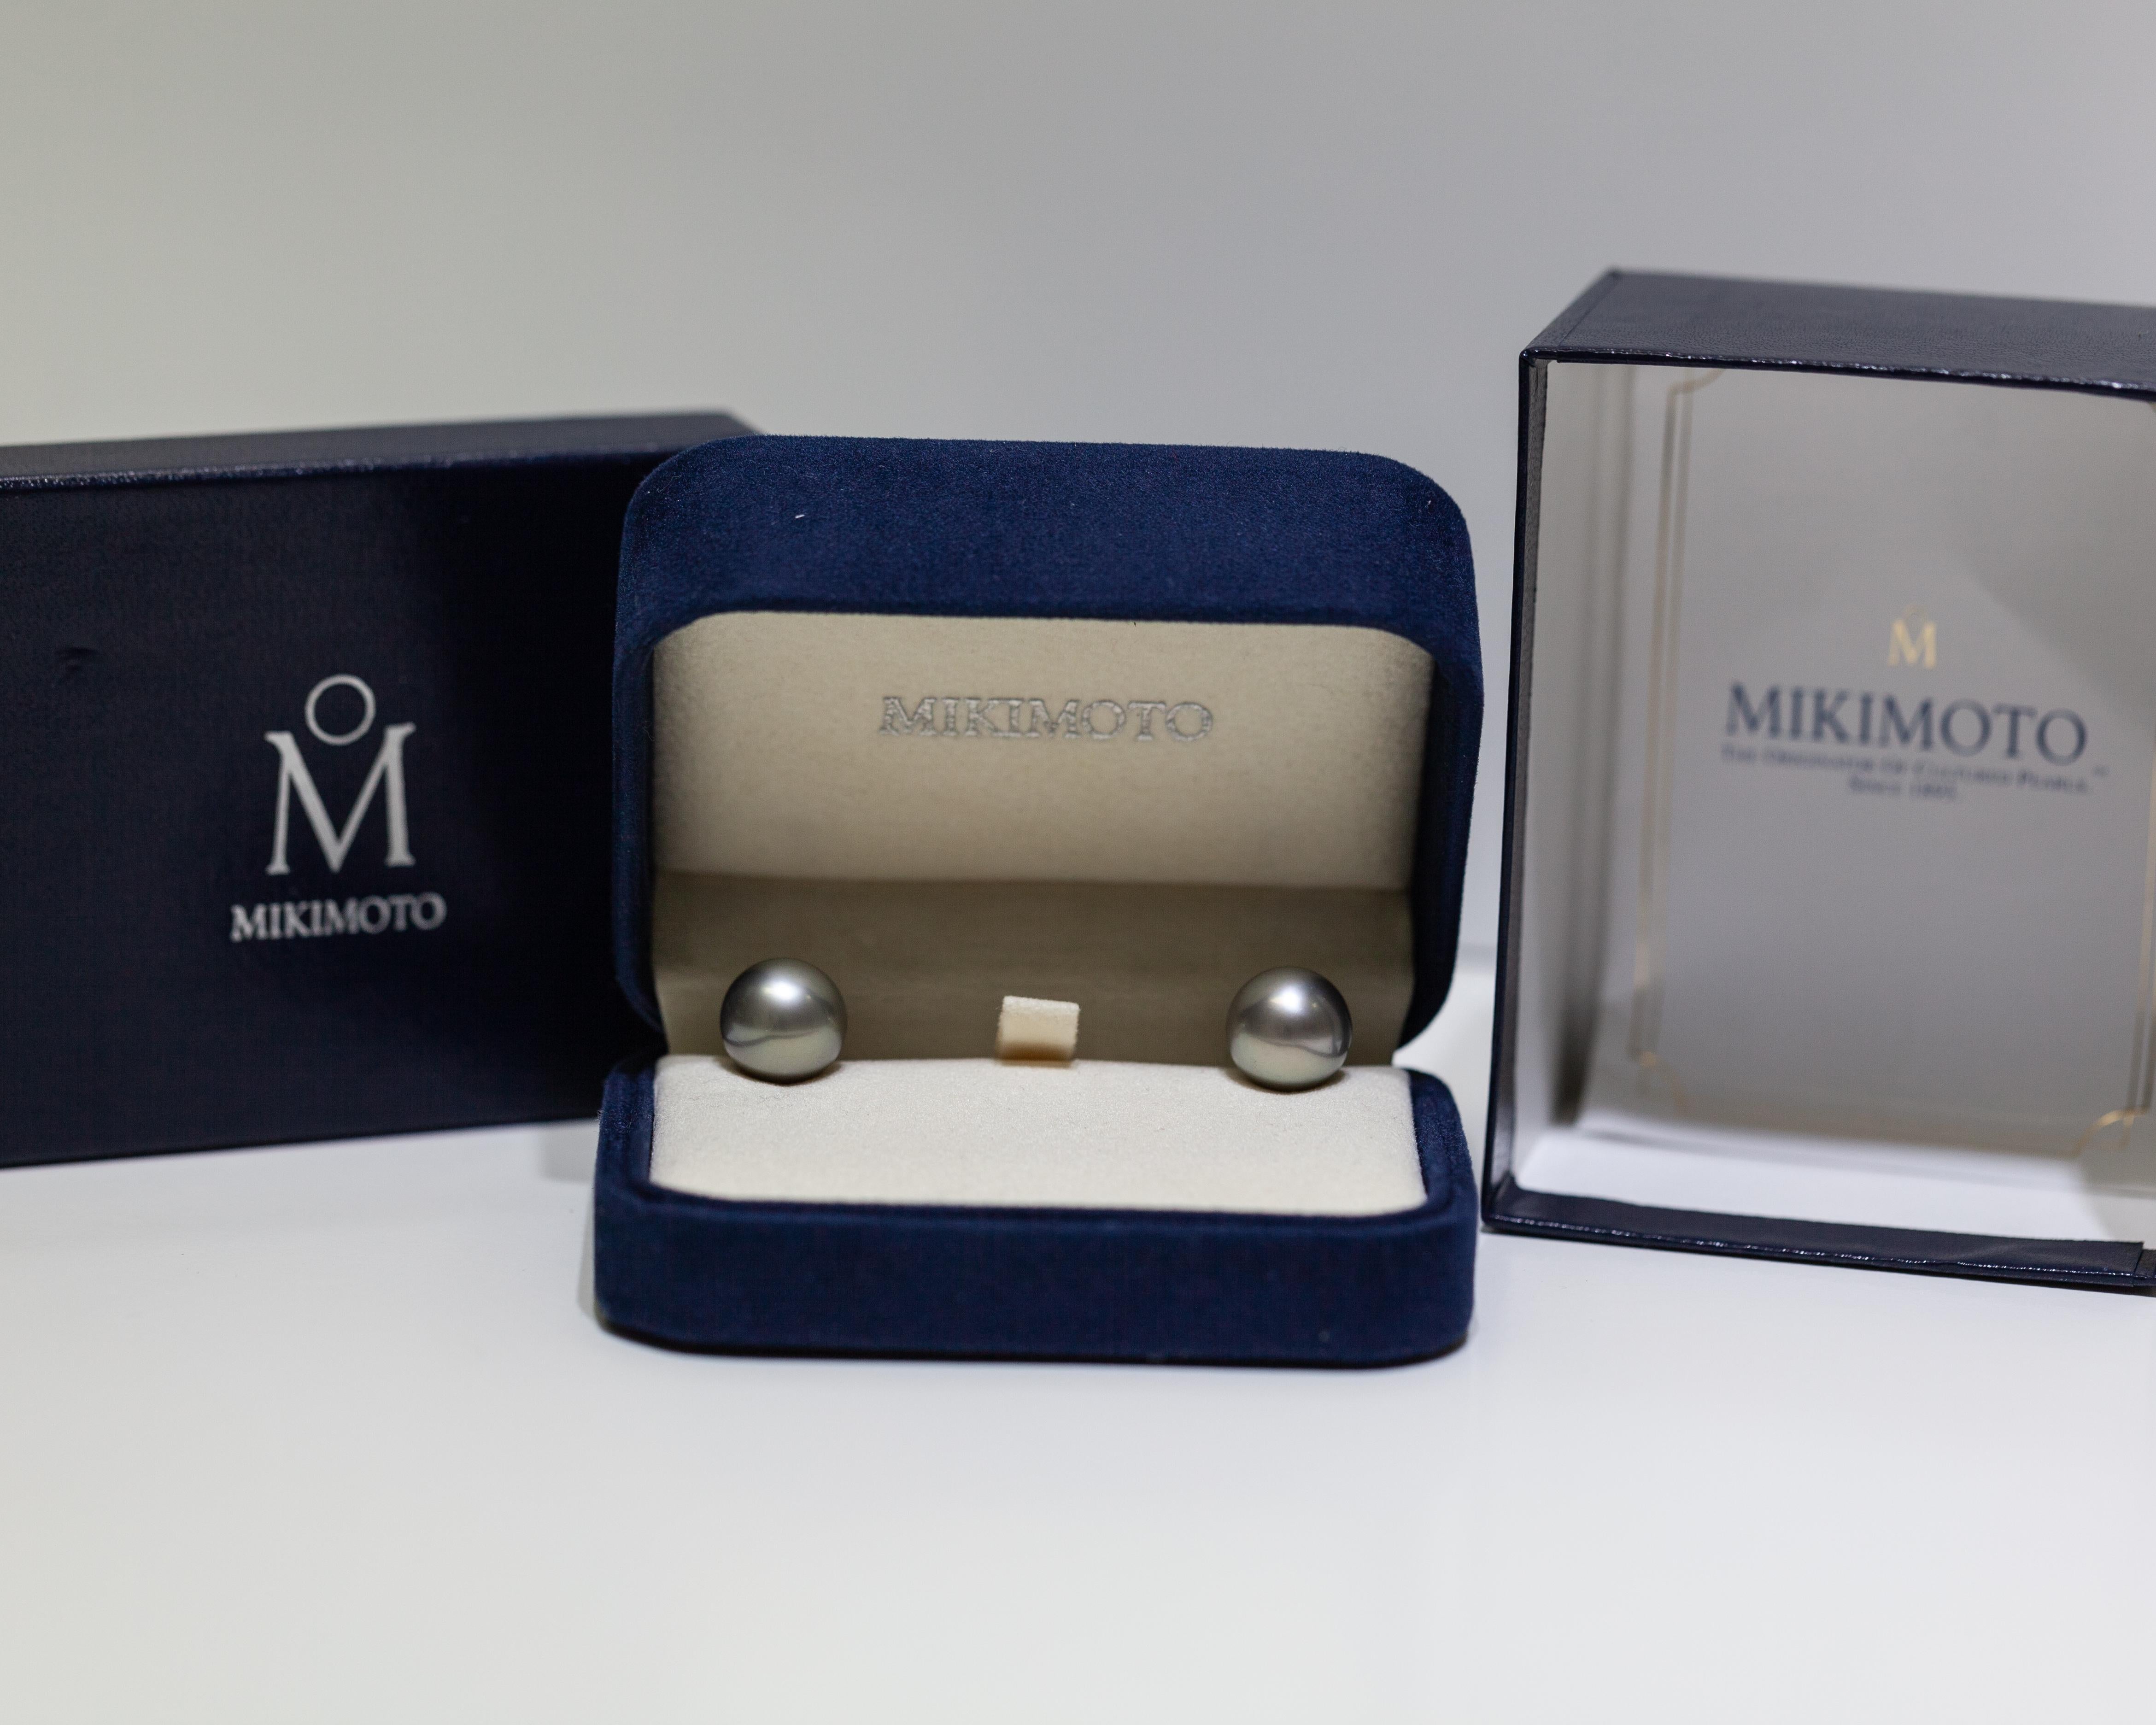 Basic Info
Listing Number NB00022
Brand Mikimoto
Model Black South Sea 12mm
Material 18k Yellow Gold Post 
Pearl Size 12.09mm & 12.06mm
Total Weight 5.3 Grams
Pre-owned Authentic Mikimoto Black South Sea Pearl Earrings with 18k yellow gold post in